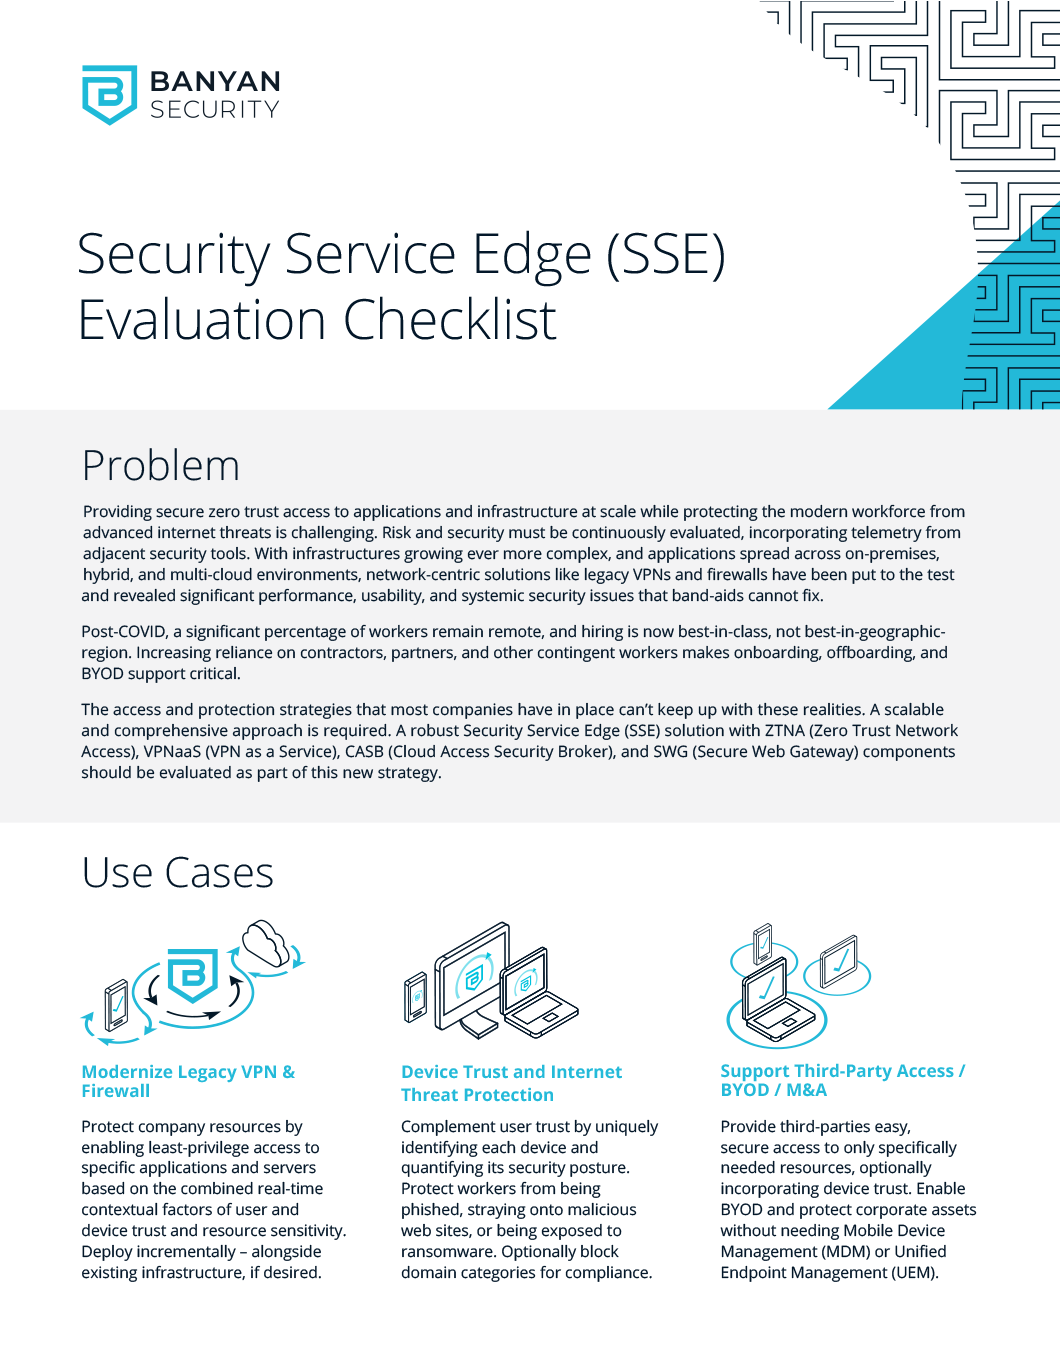 Banyan Security SSE Evaluation Checklist thumb